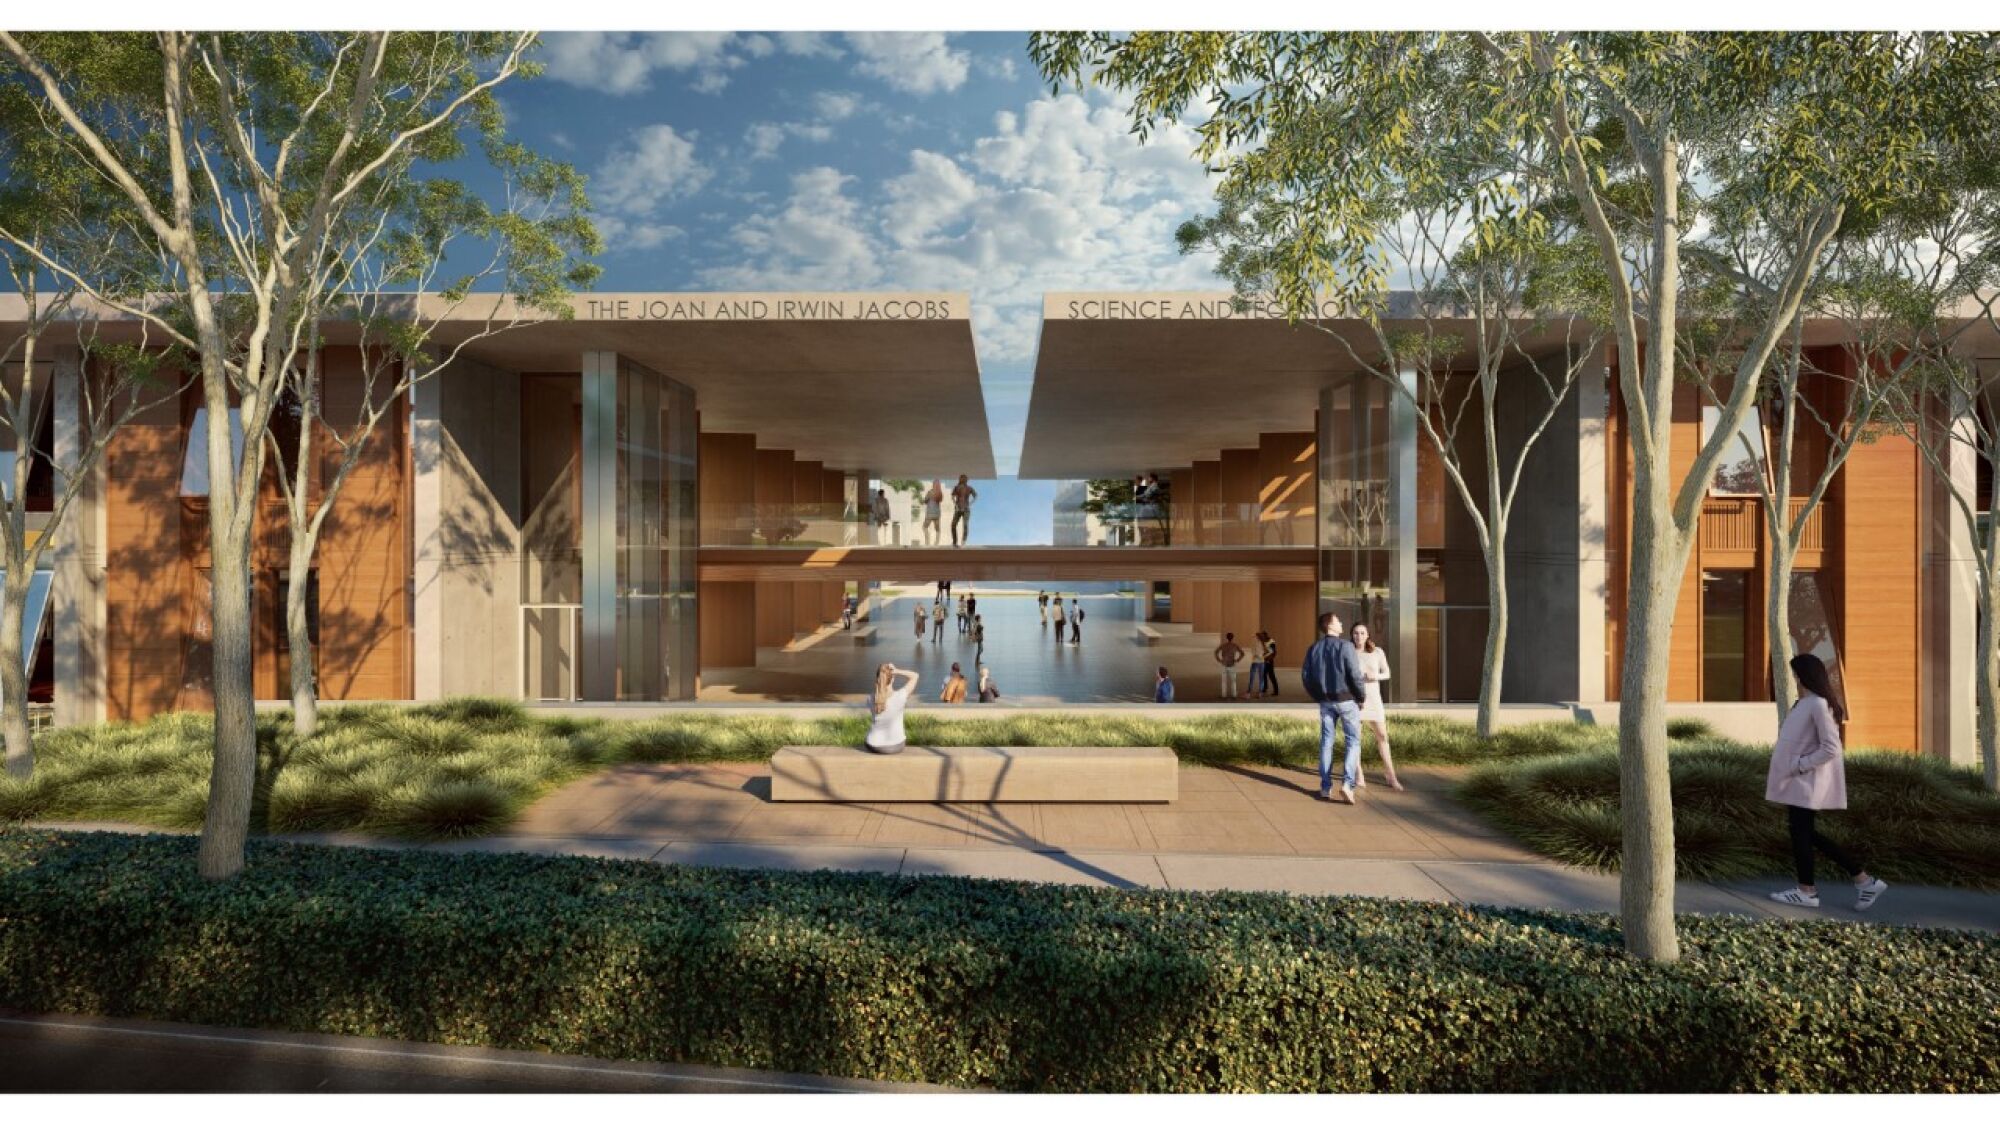 Artist's rendering of the science and technology center that will be built at the Salk Institute.